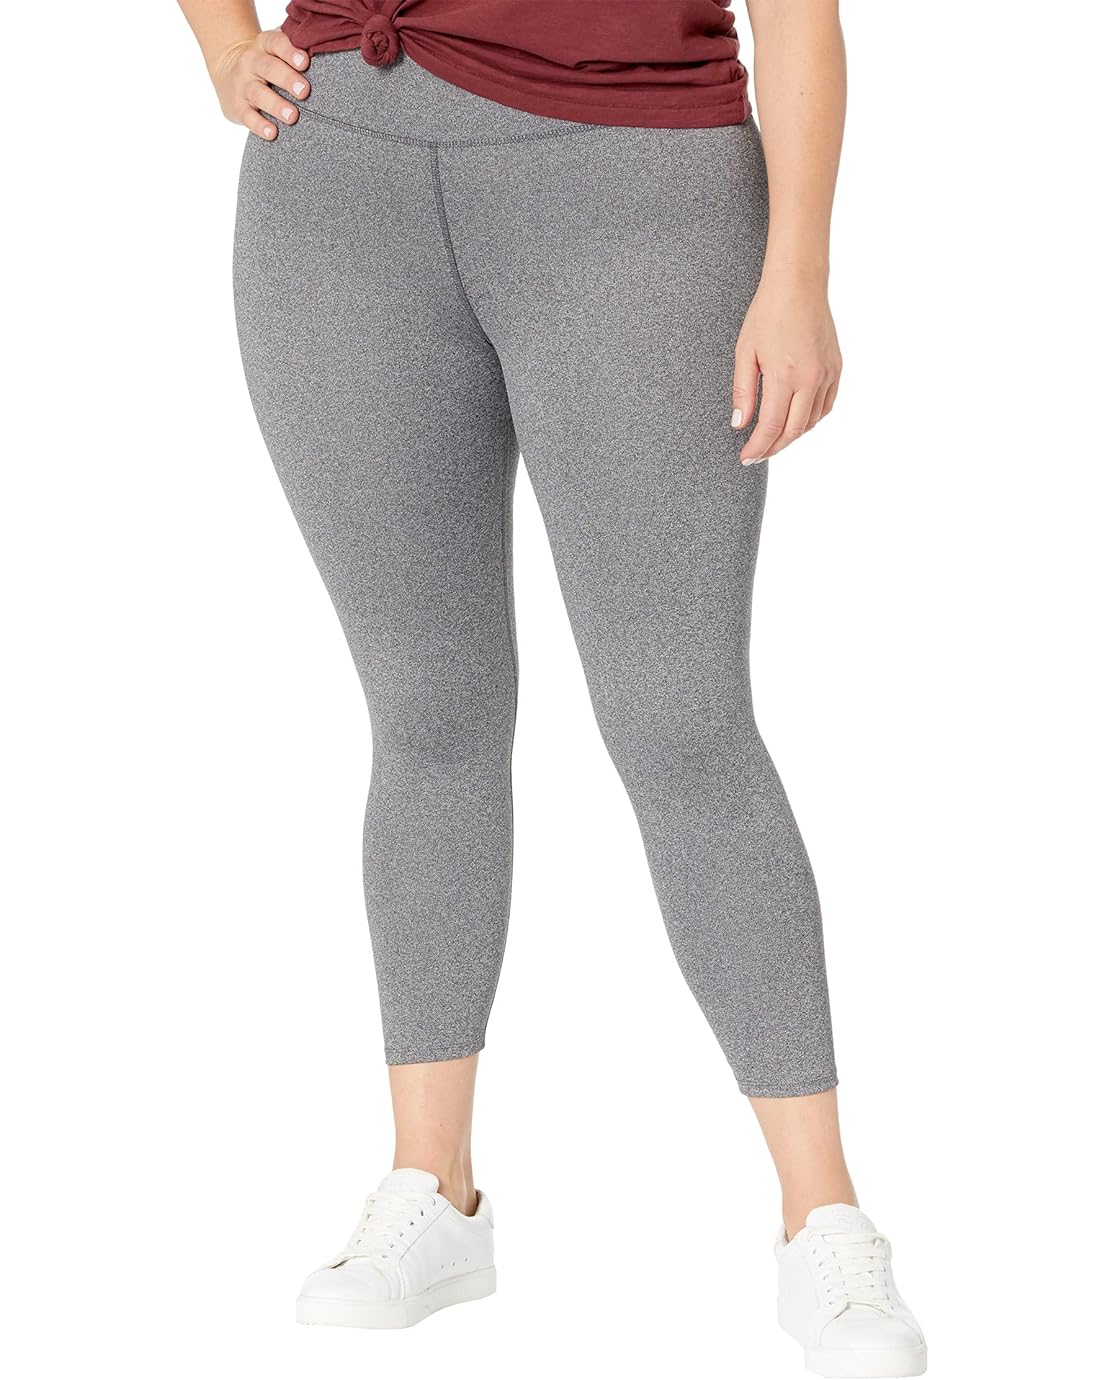 Madewell Plus MWL Form High-Rise 25 Leggings in Heathered Charcoal